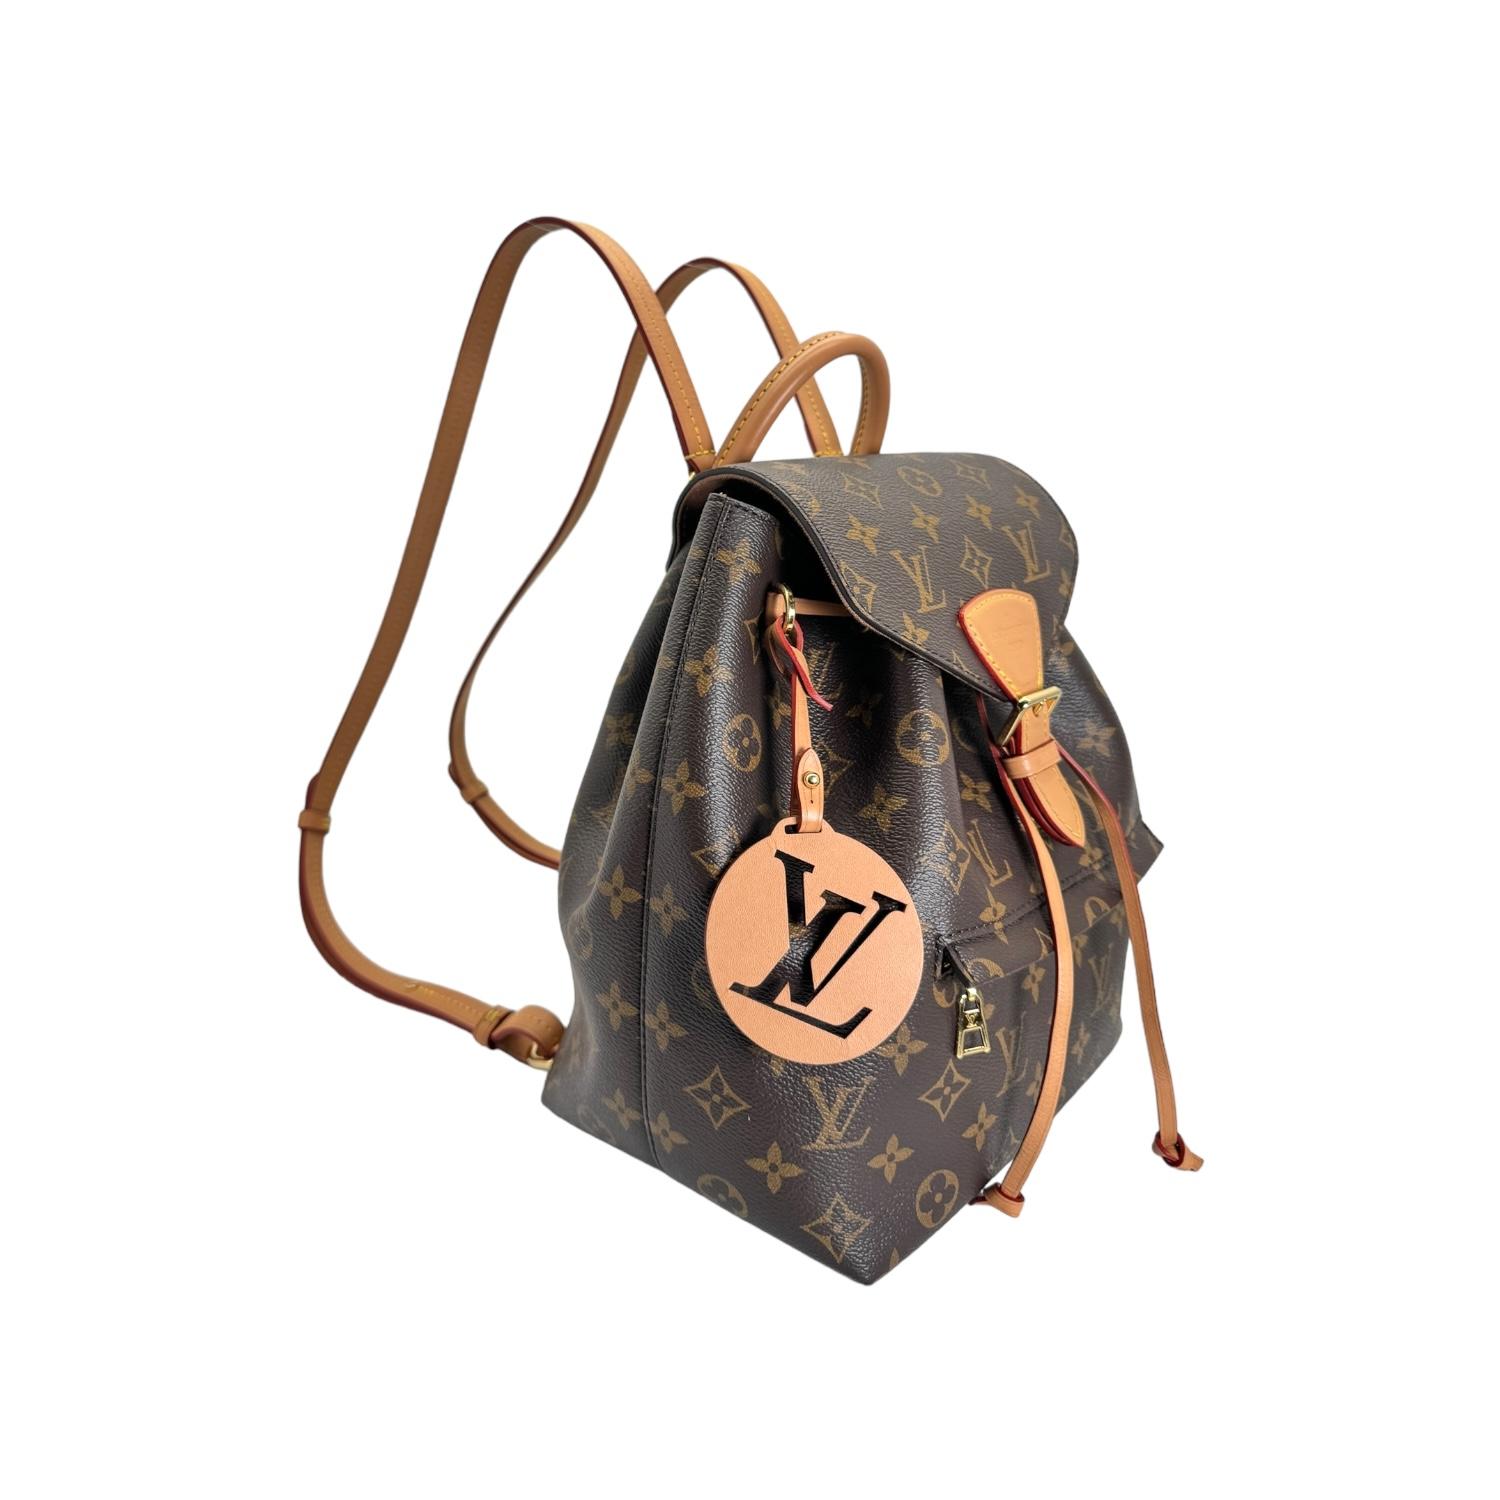 Louis Vuitton Monogram Montsouris PM Backpack NM In Good Condition For Sale In Scottsdale, AZ